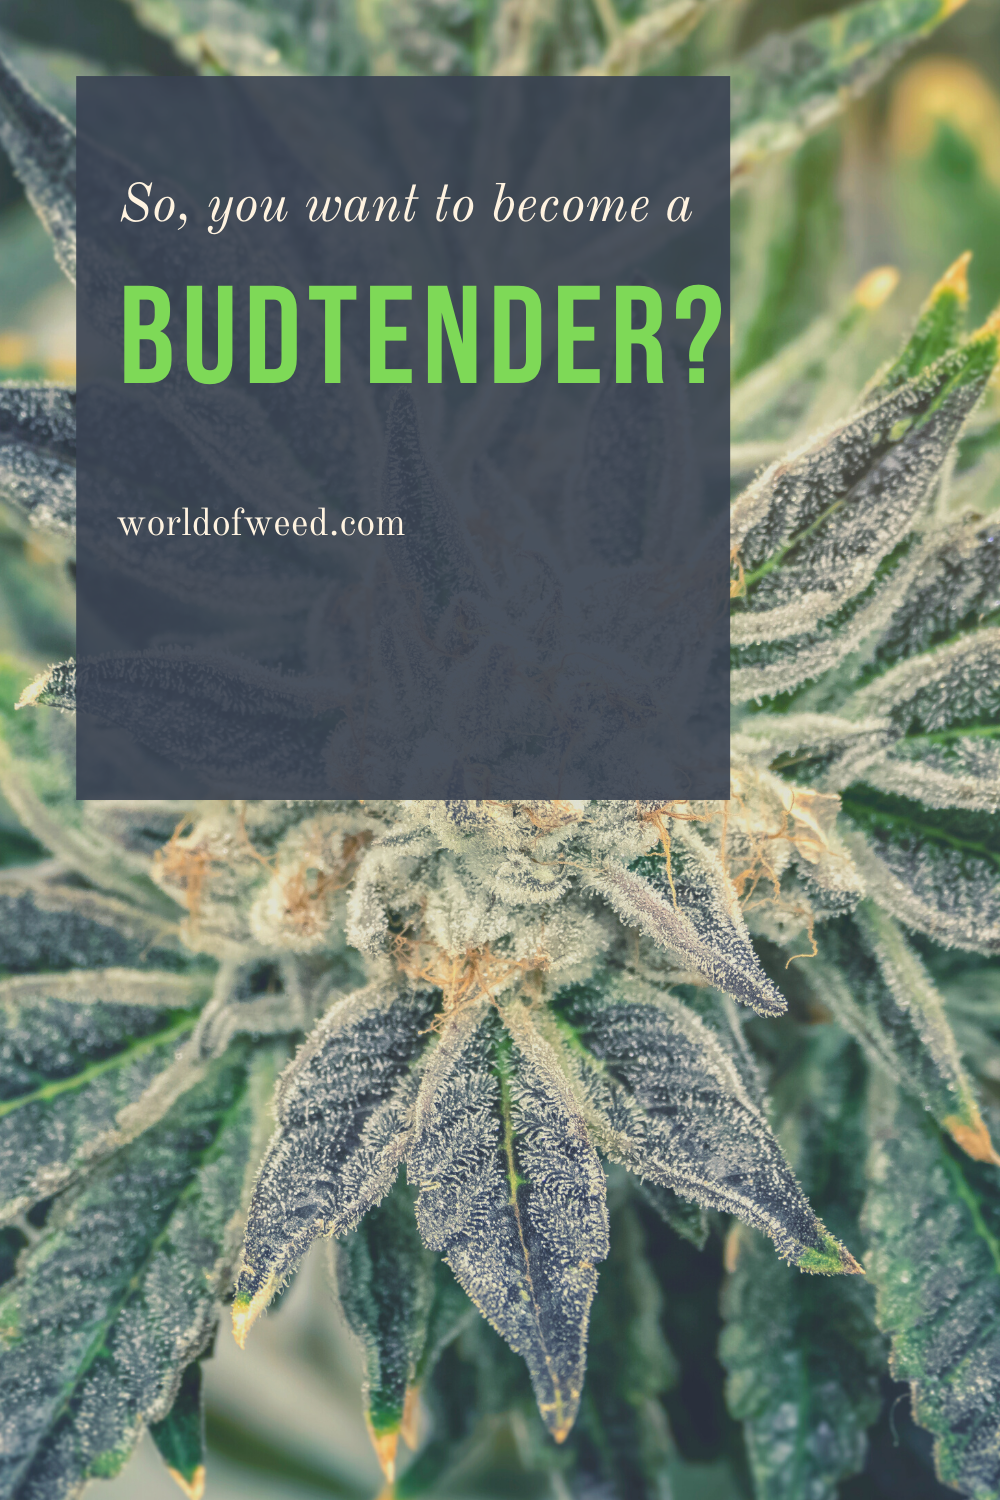 So You Want to Become a Budtender